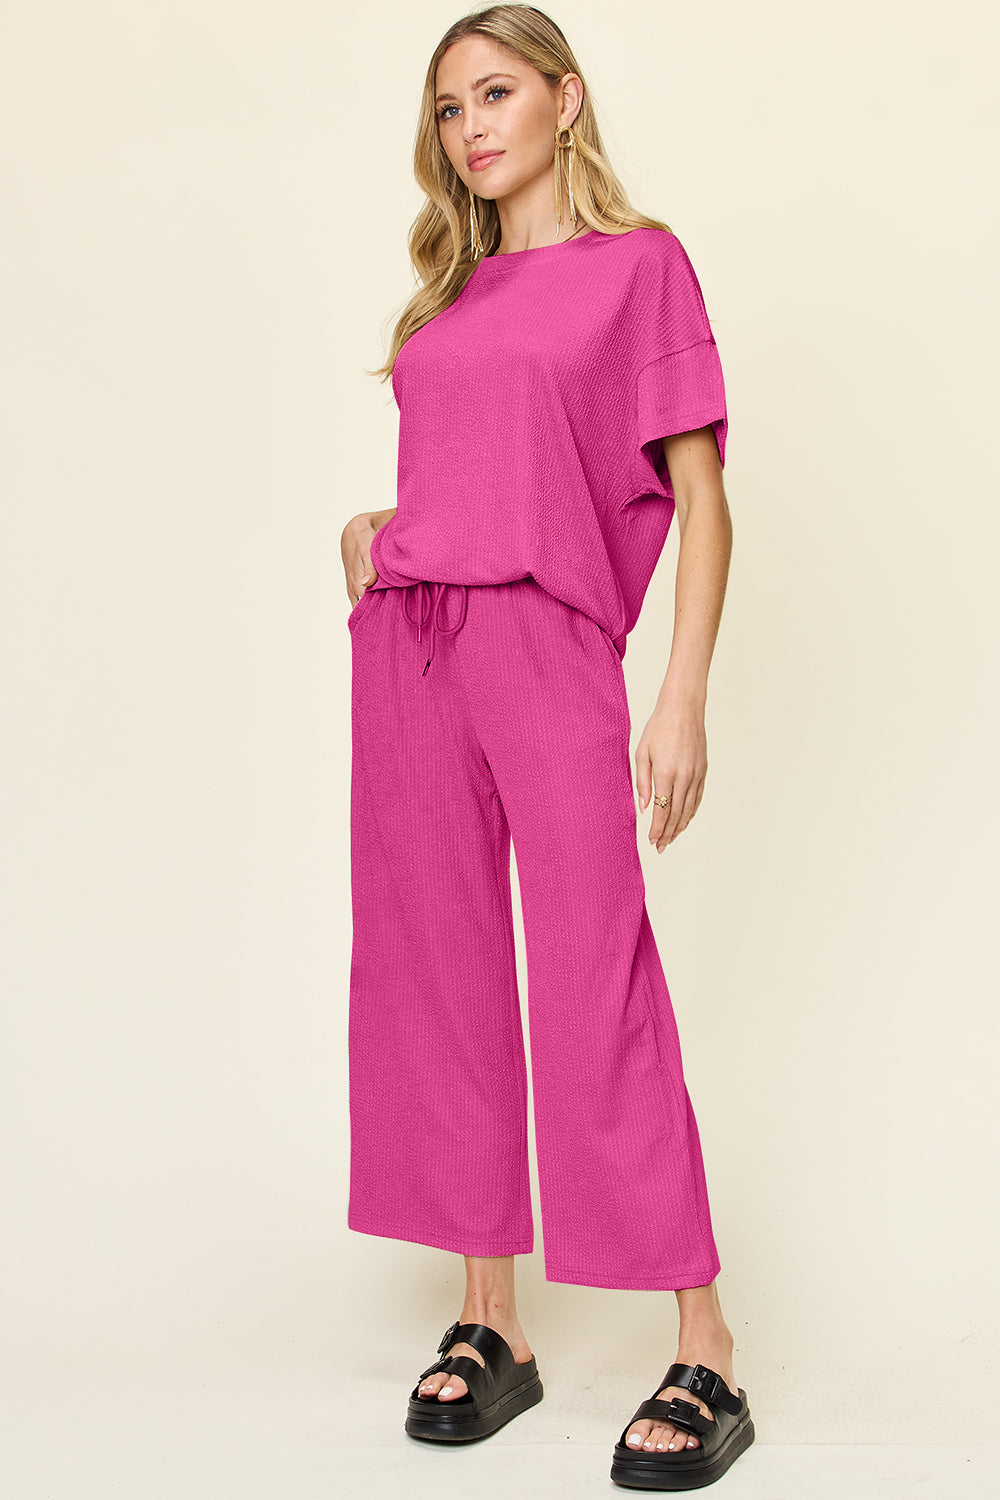 Textured Knit Top and Wide Leg Pant Set Hot Pink